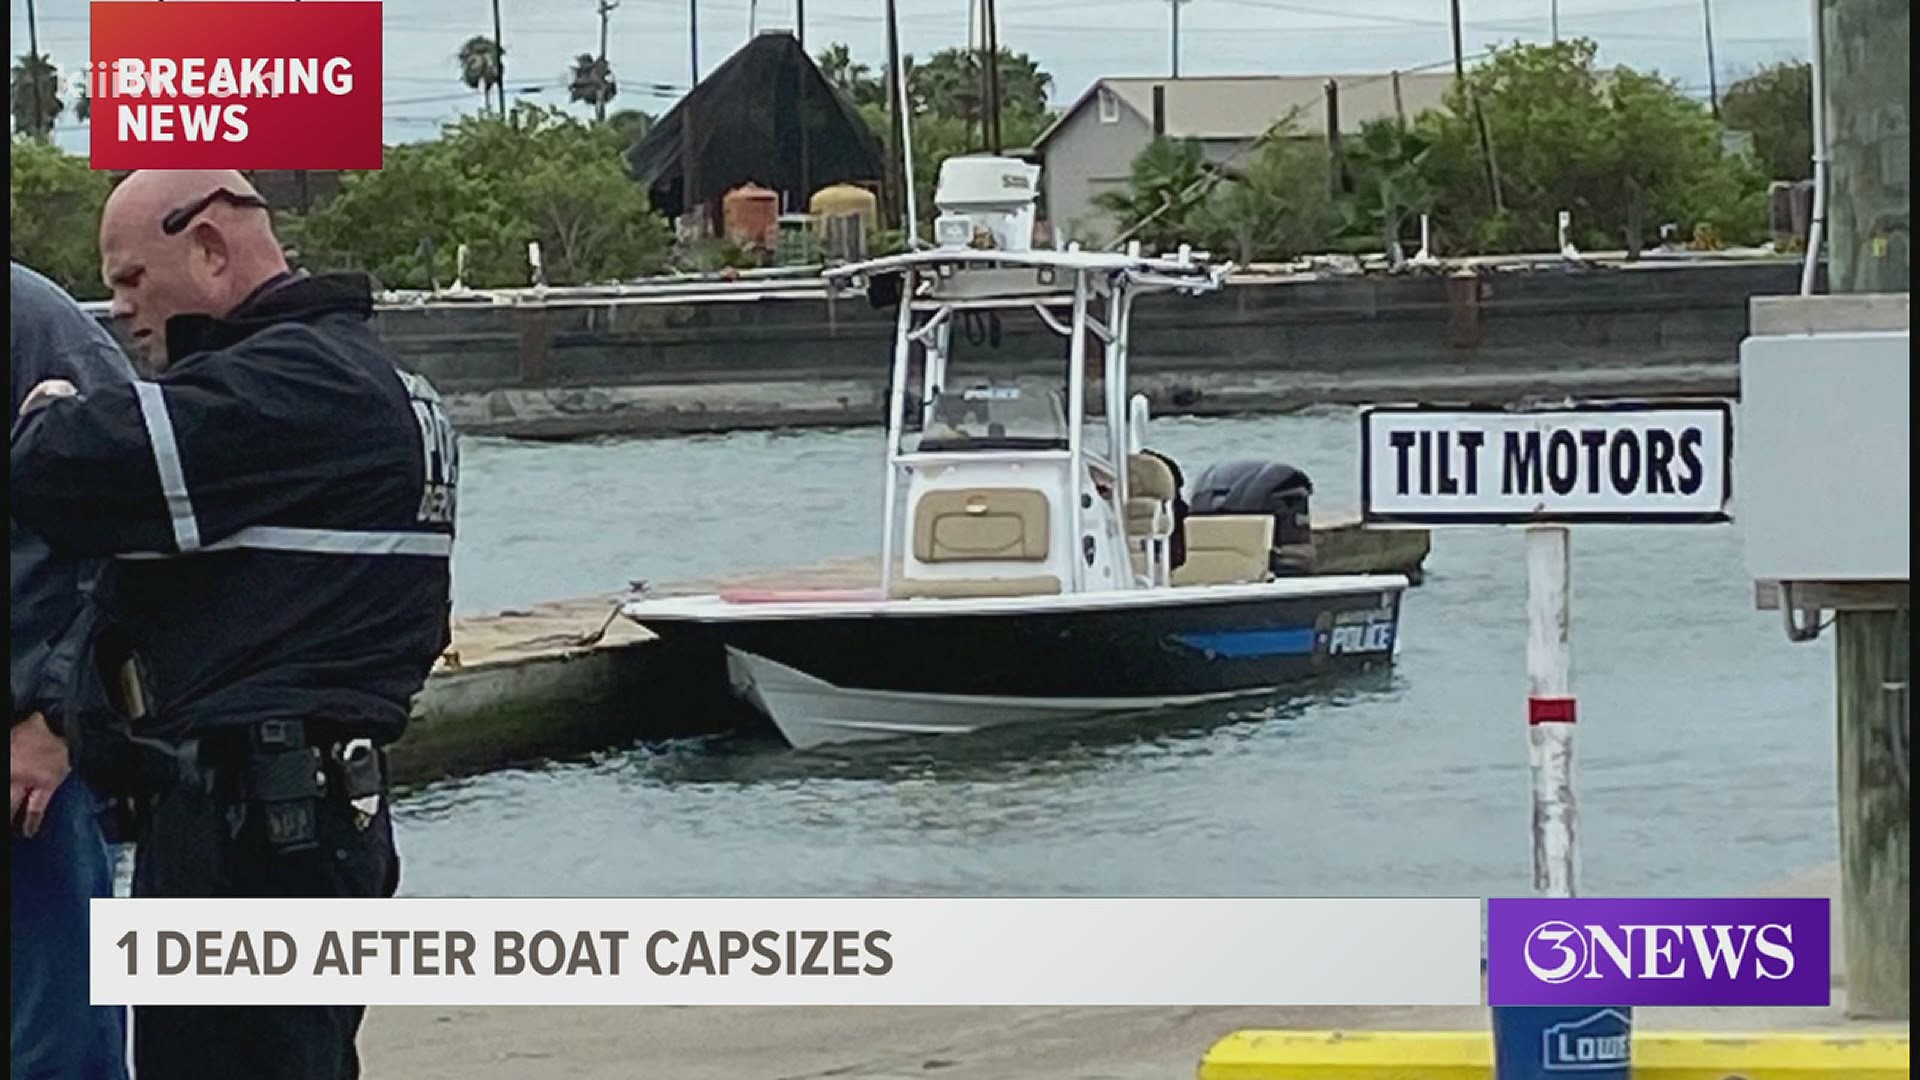 Multiple victims had to be treated for hypothermia after their boats capsized Friday. Police said one did not survive.